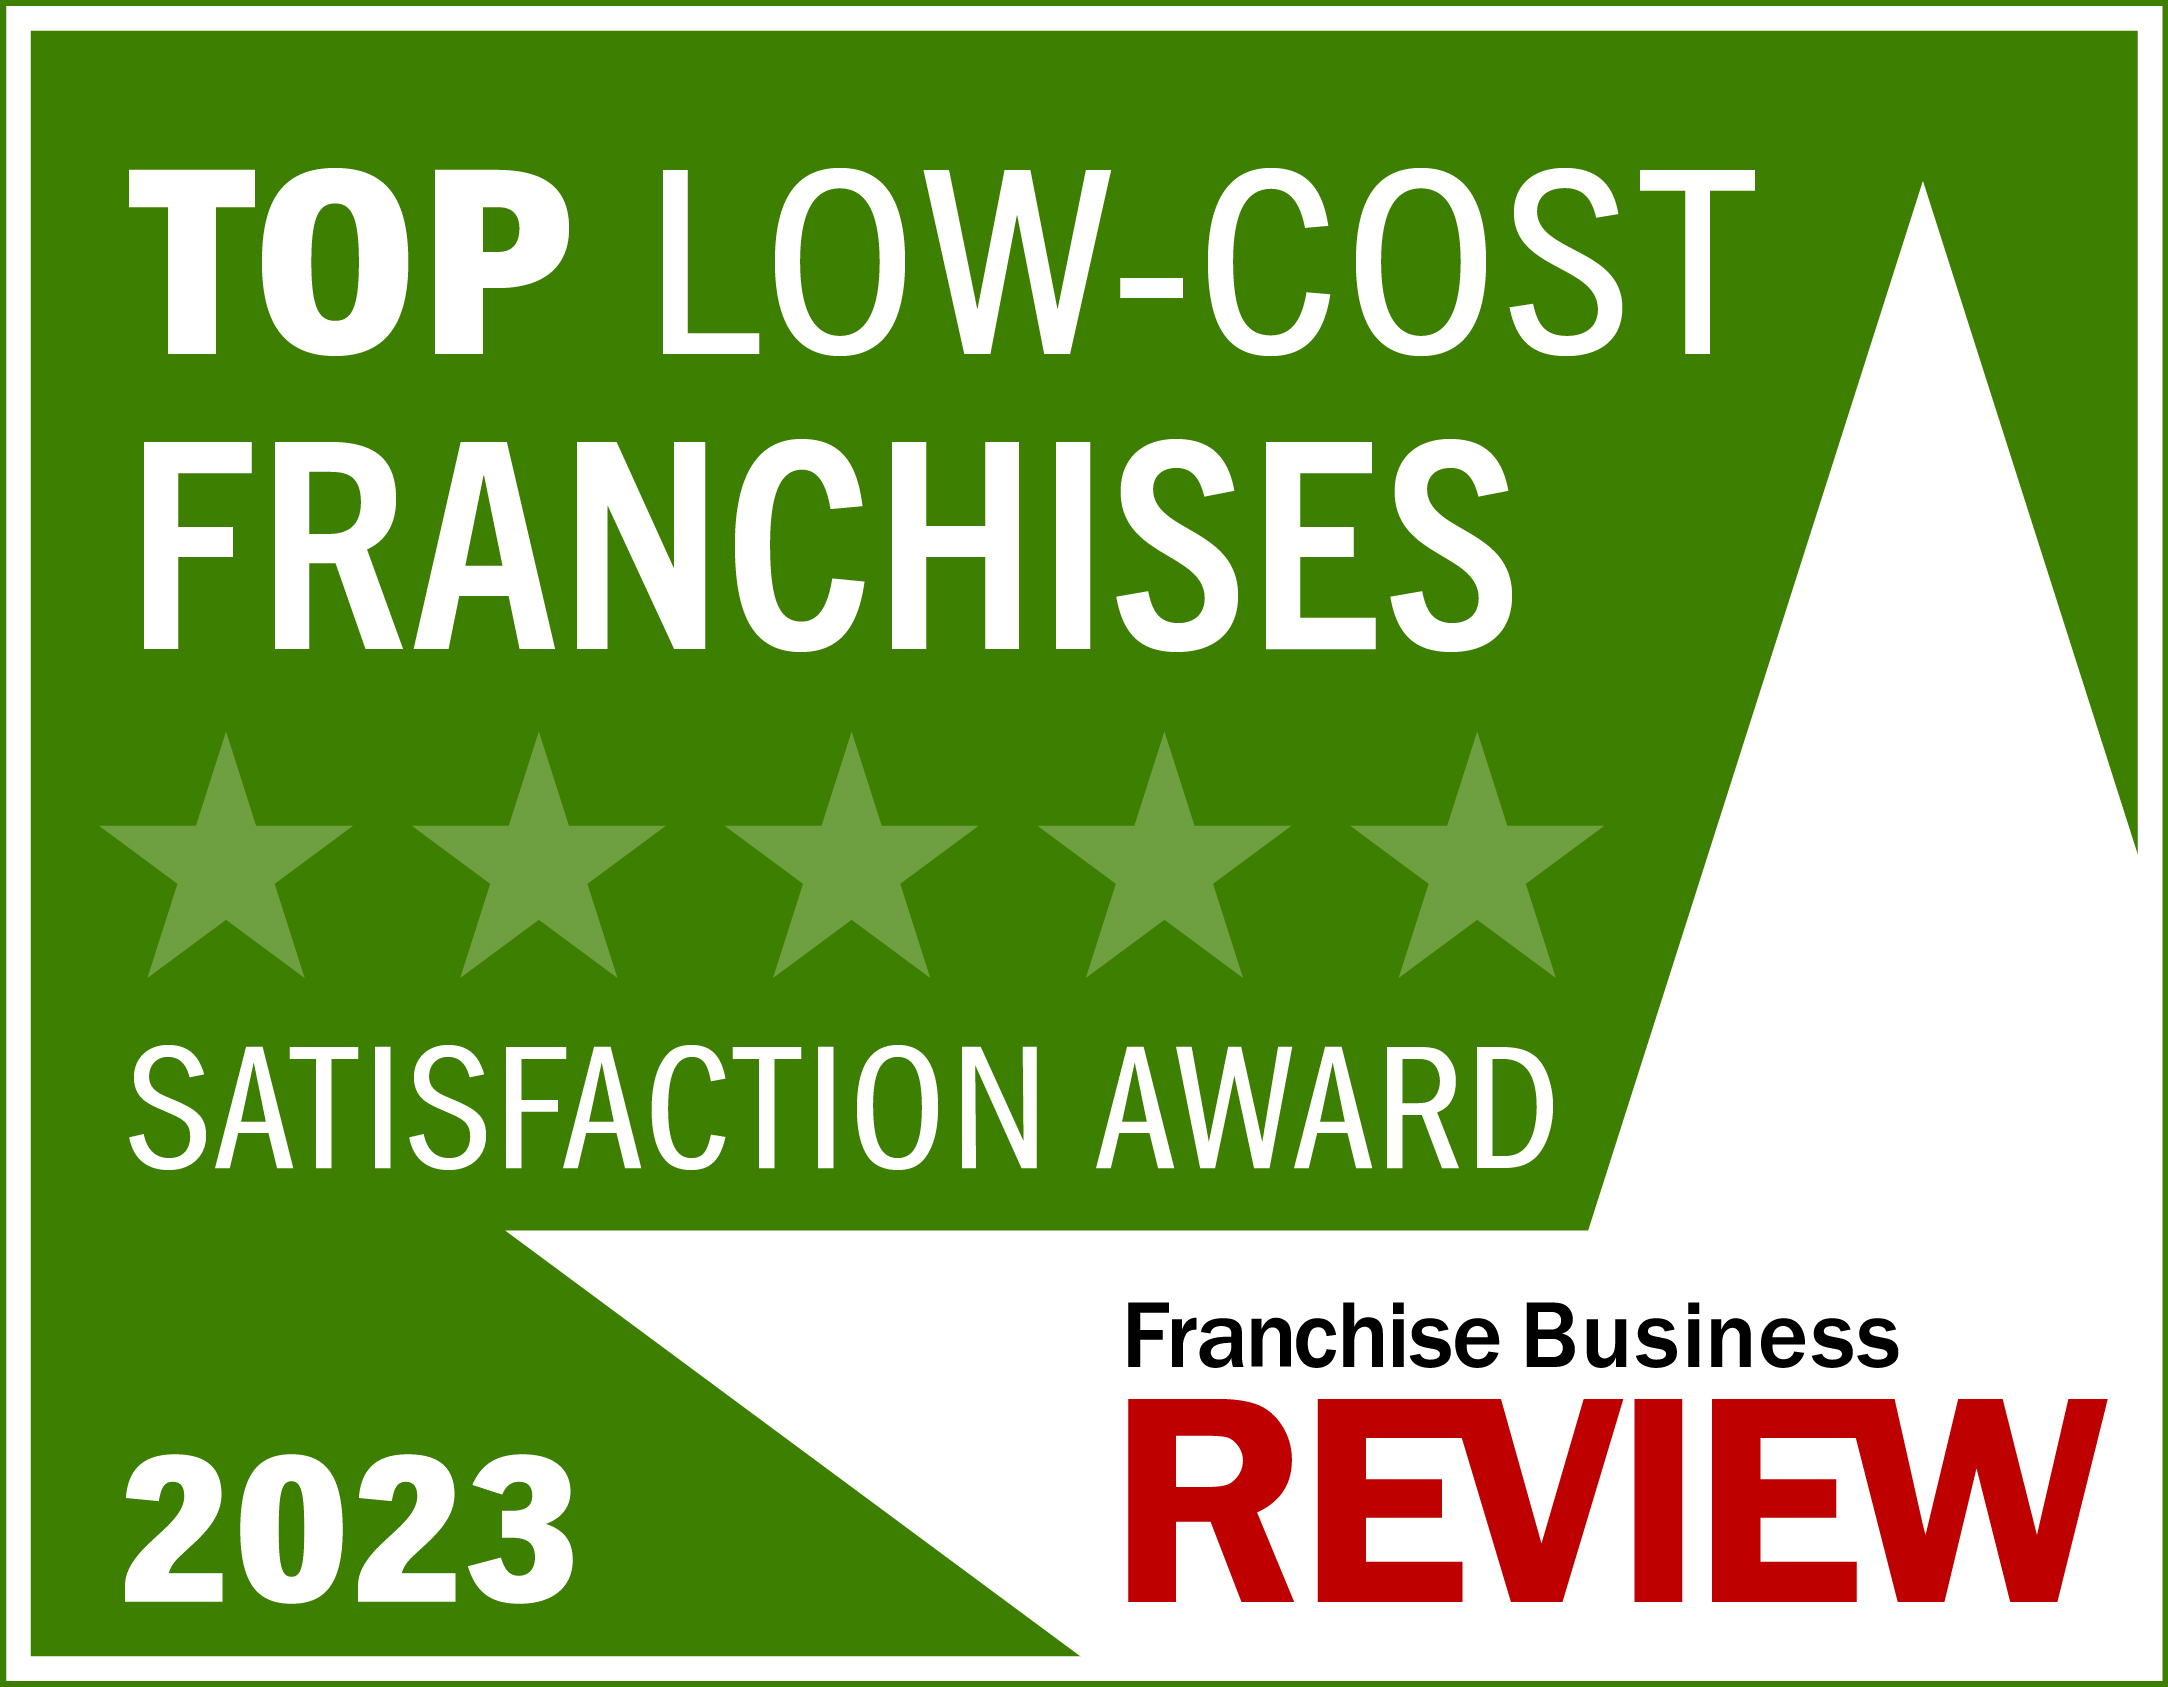 Grand Welcome named a Top Low Cost Franchise by FBR